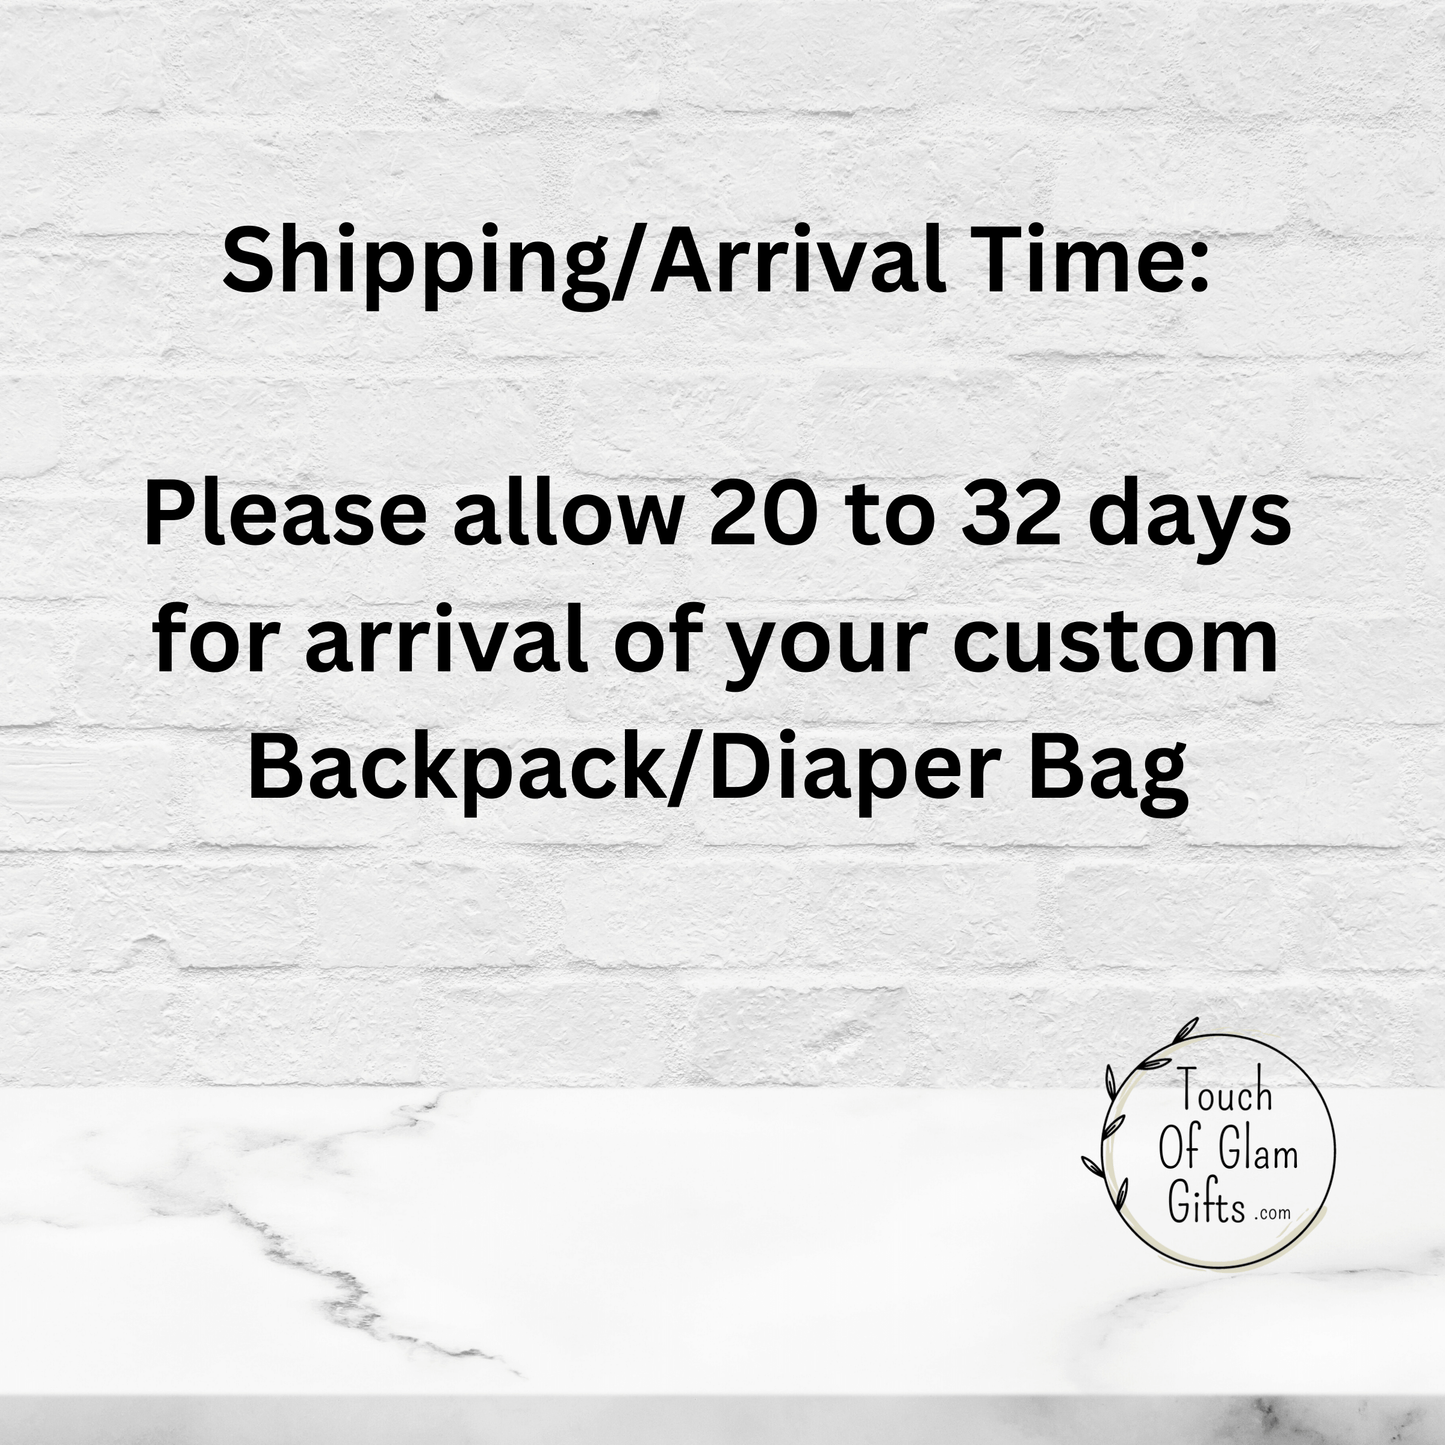 Shipping arrival time is between twenty to thirty two days because this is a custom diaper backpack bag